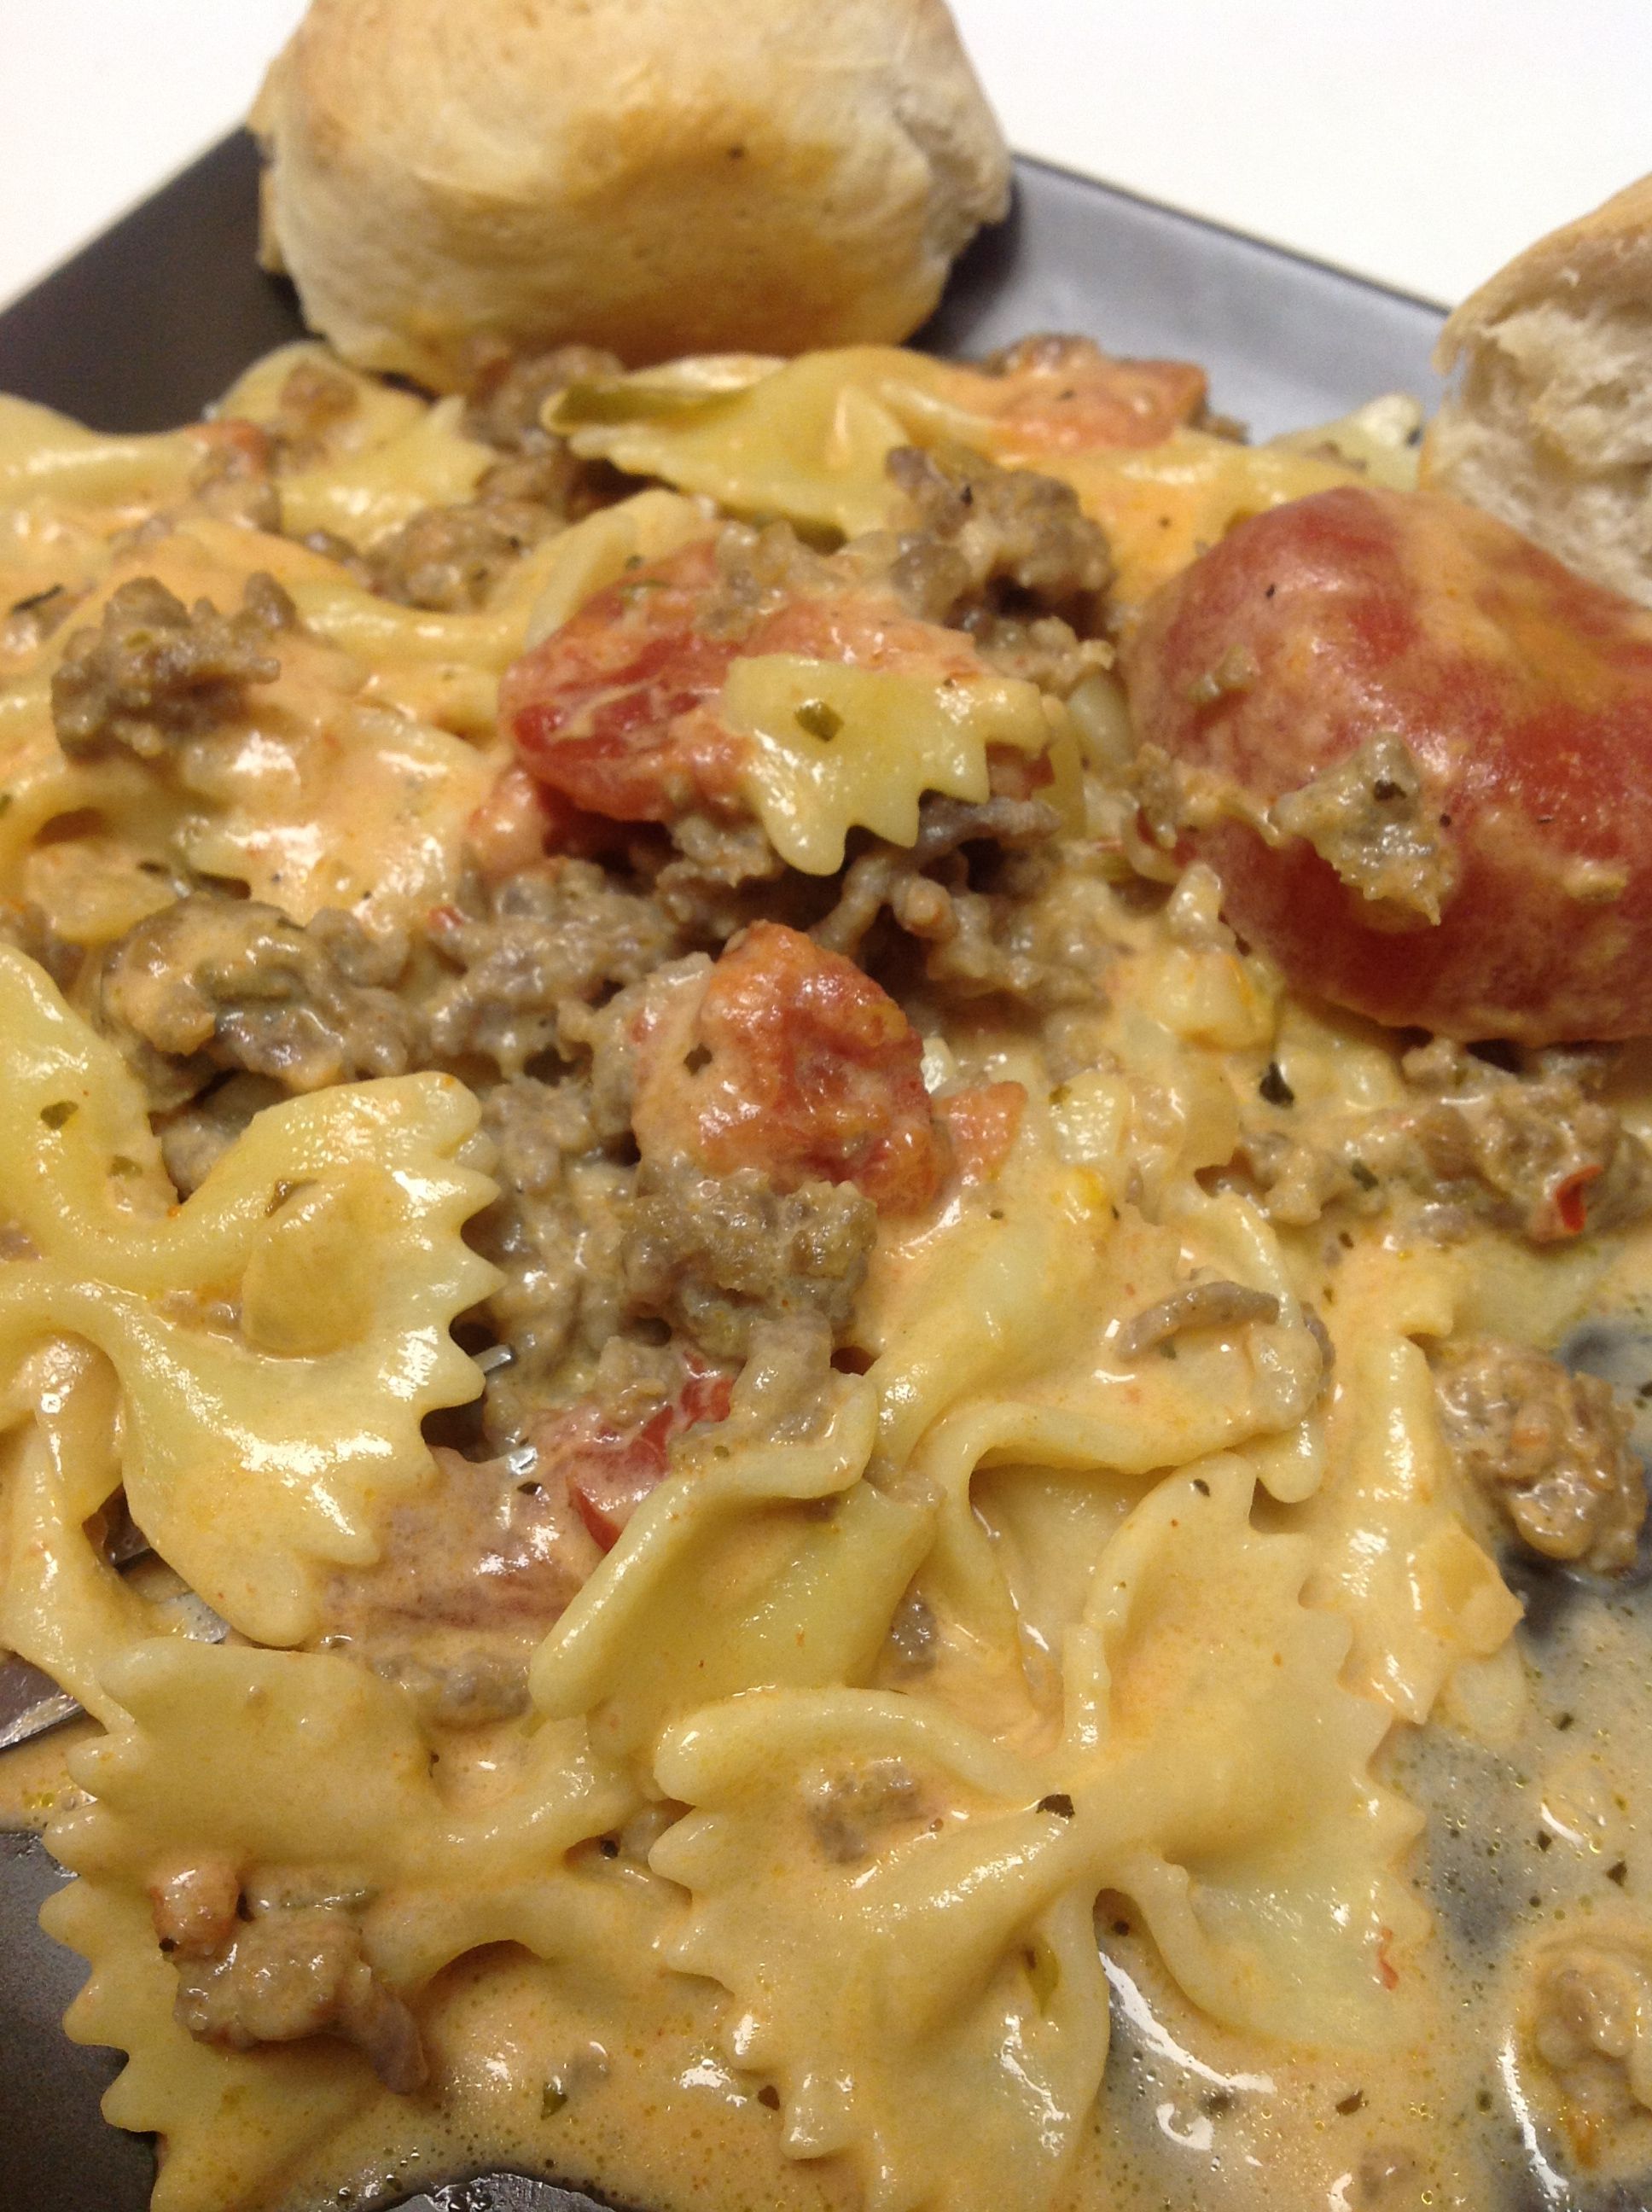 Italian Sausage with Bowtie Pasta…..I make this, and it is so good. I use sweet Italian sausage